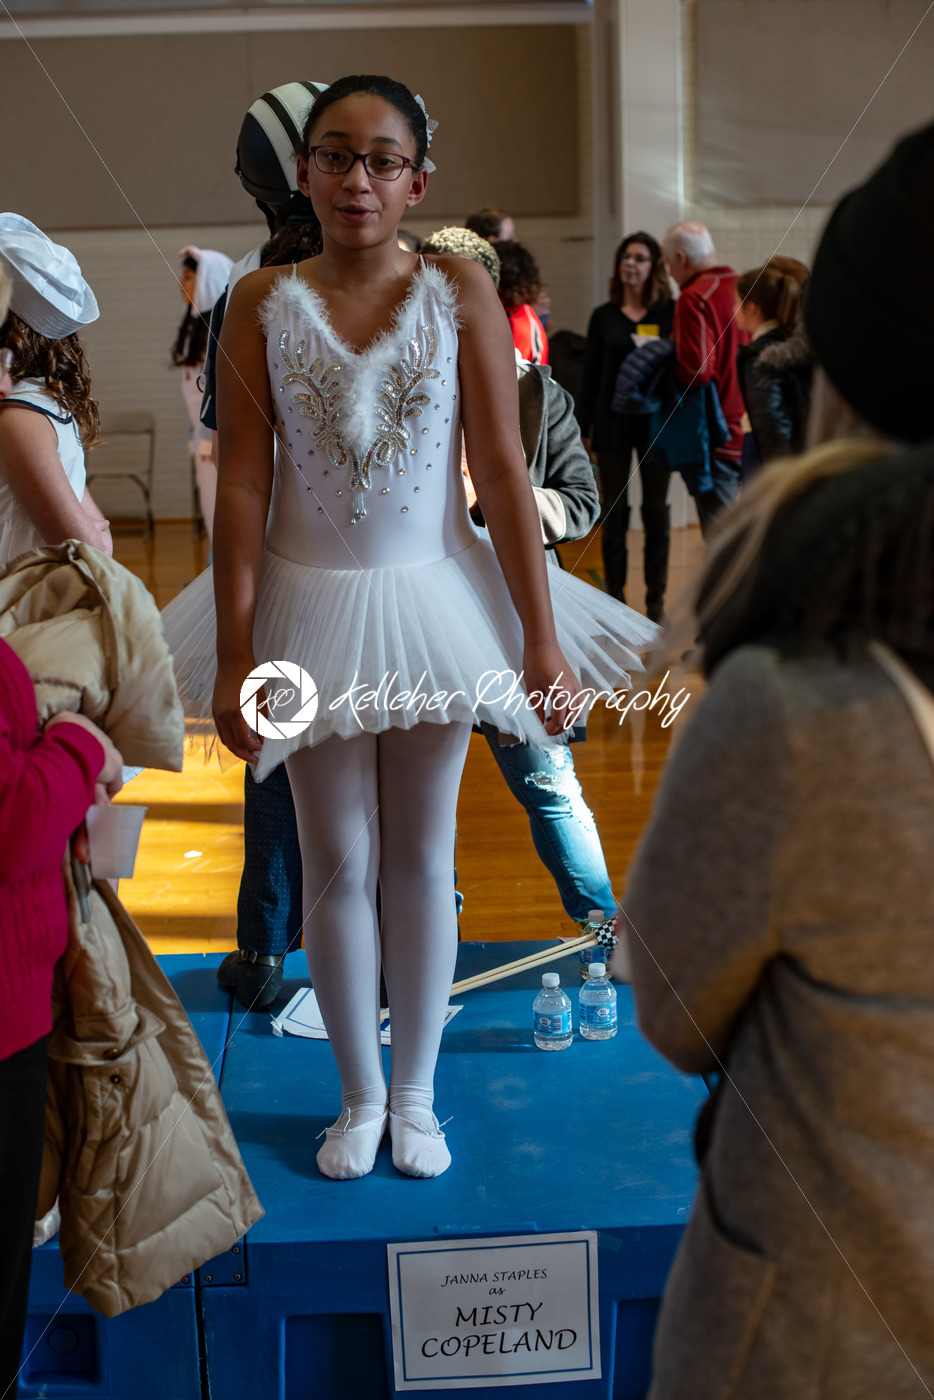 ROSEMONT, PA – JANUARY 11, 2019: Fourth Grade Women in Wax at The Agnes Irwin School - Kelleher Photography Store